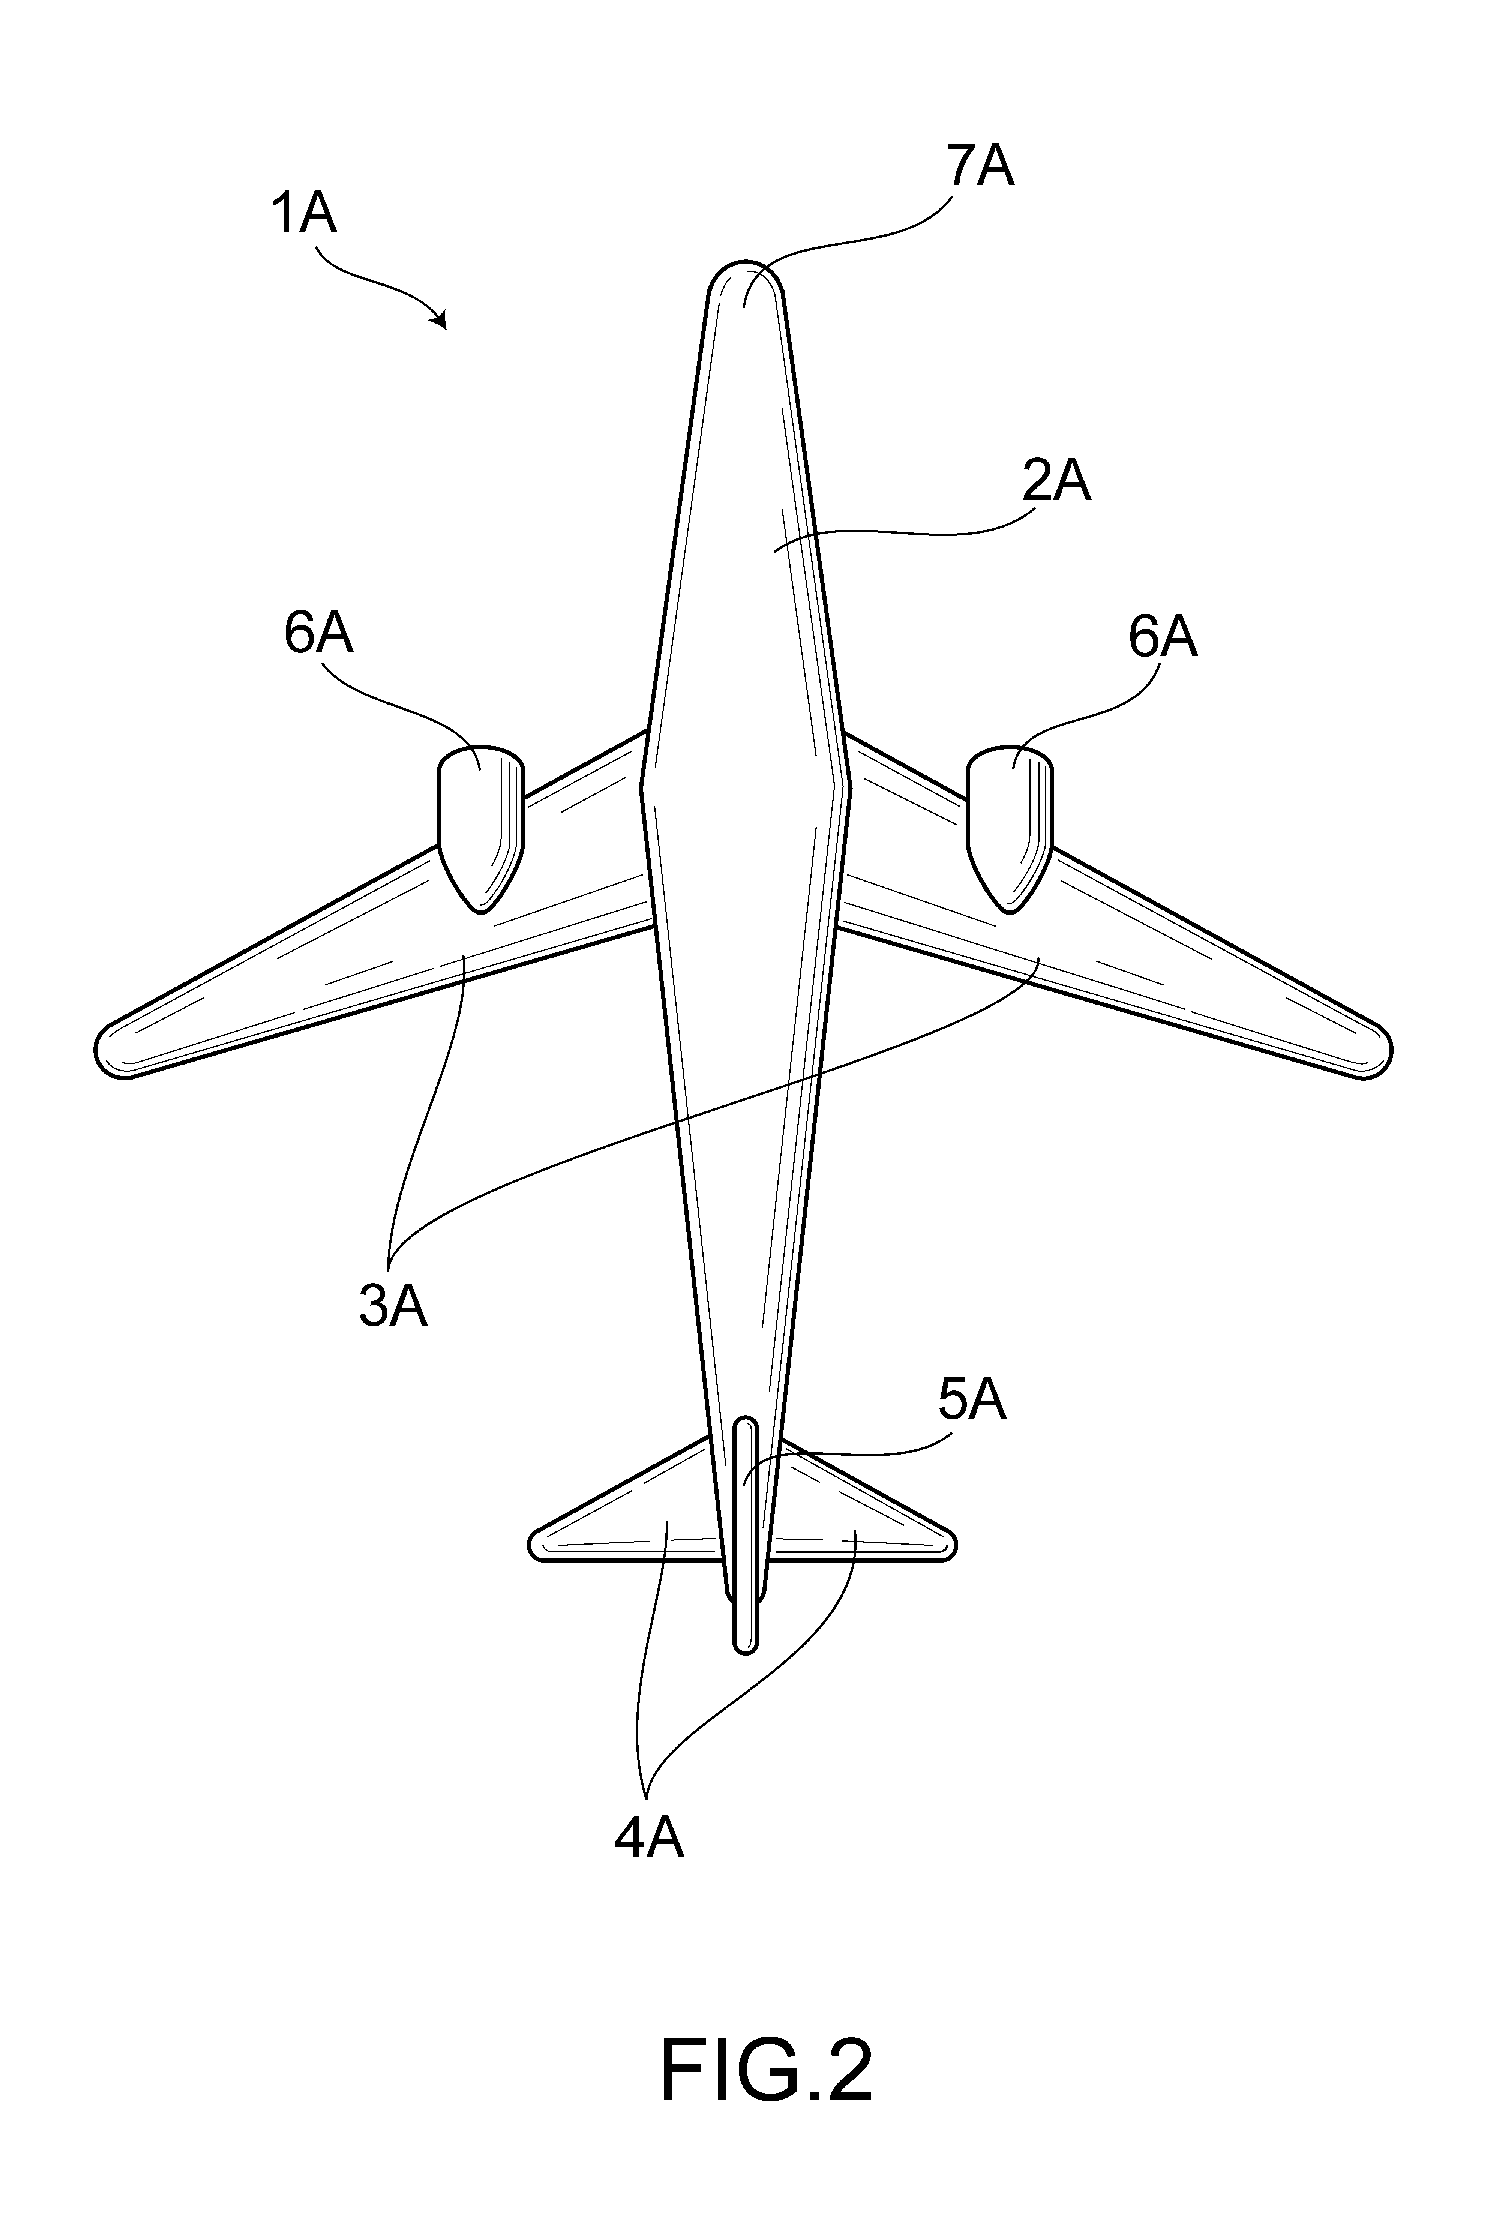 Method of flying an aircraft